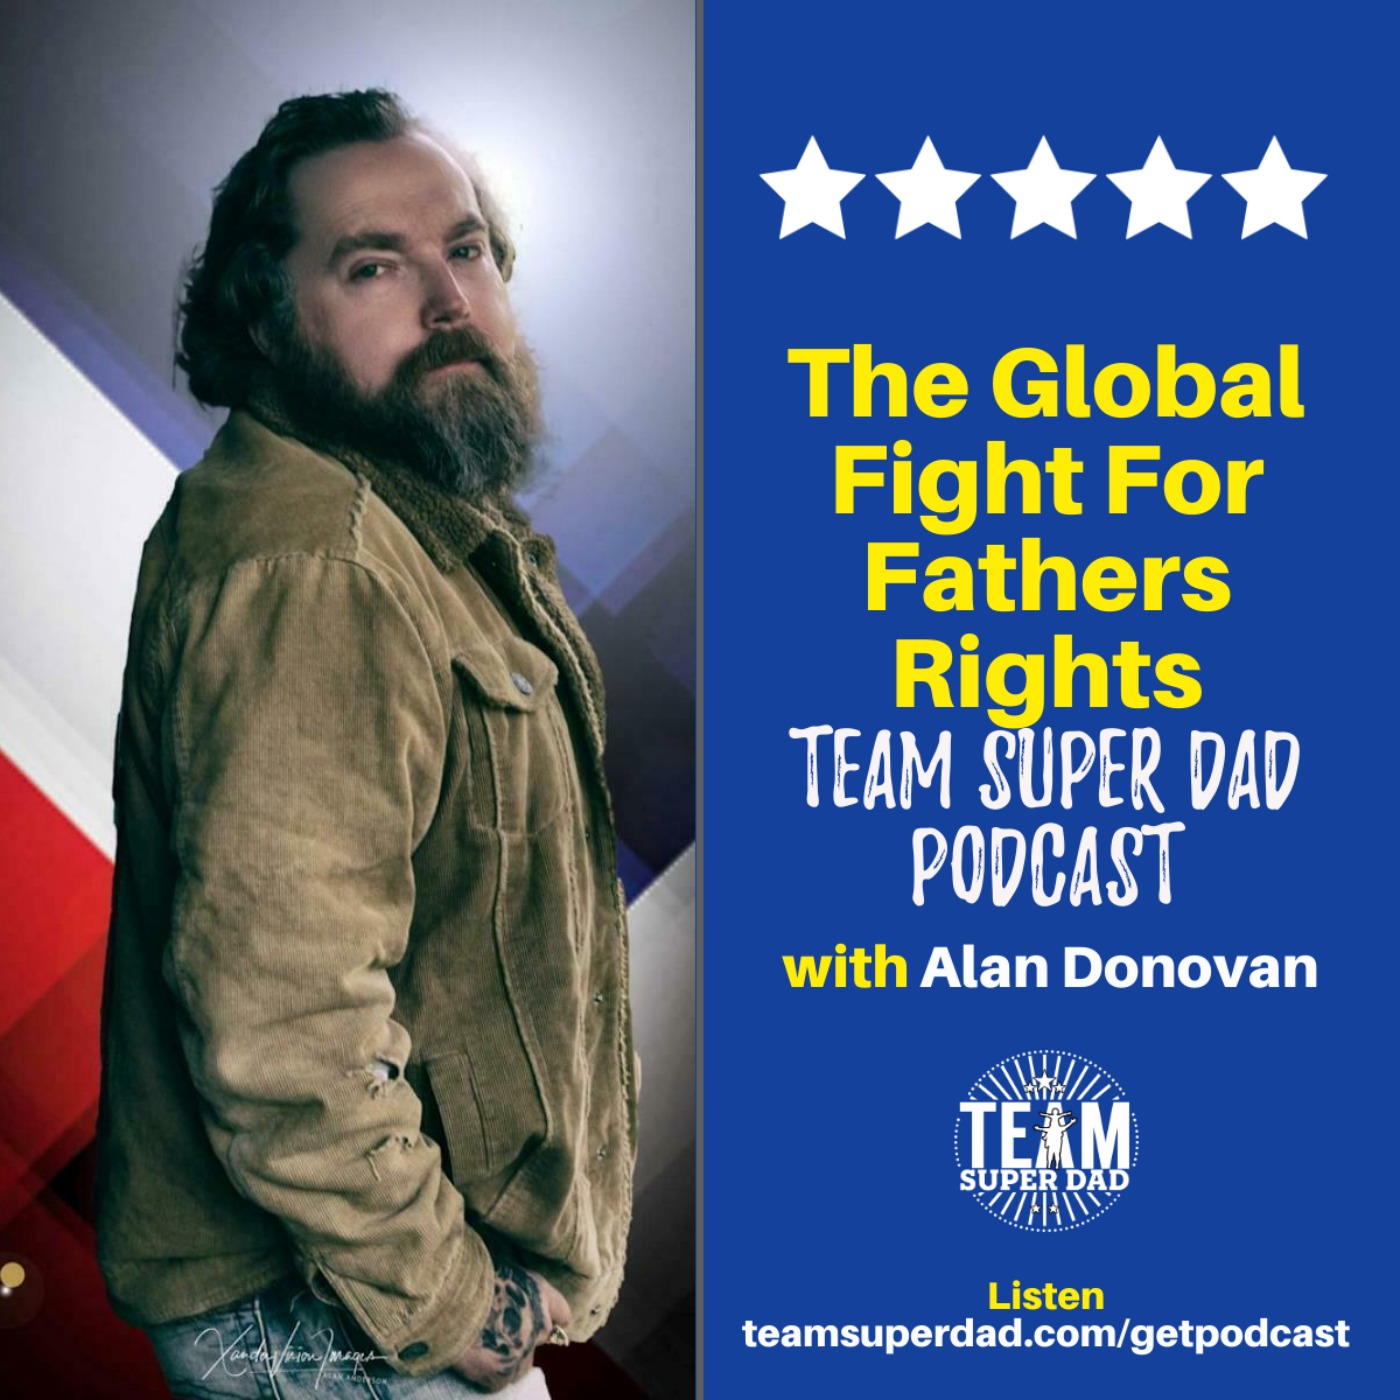 The Global Fight For Fathers Rights with Alan Donovan